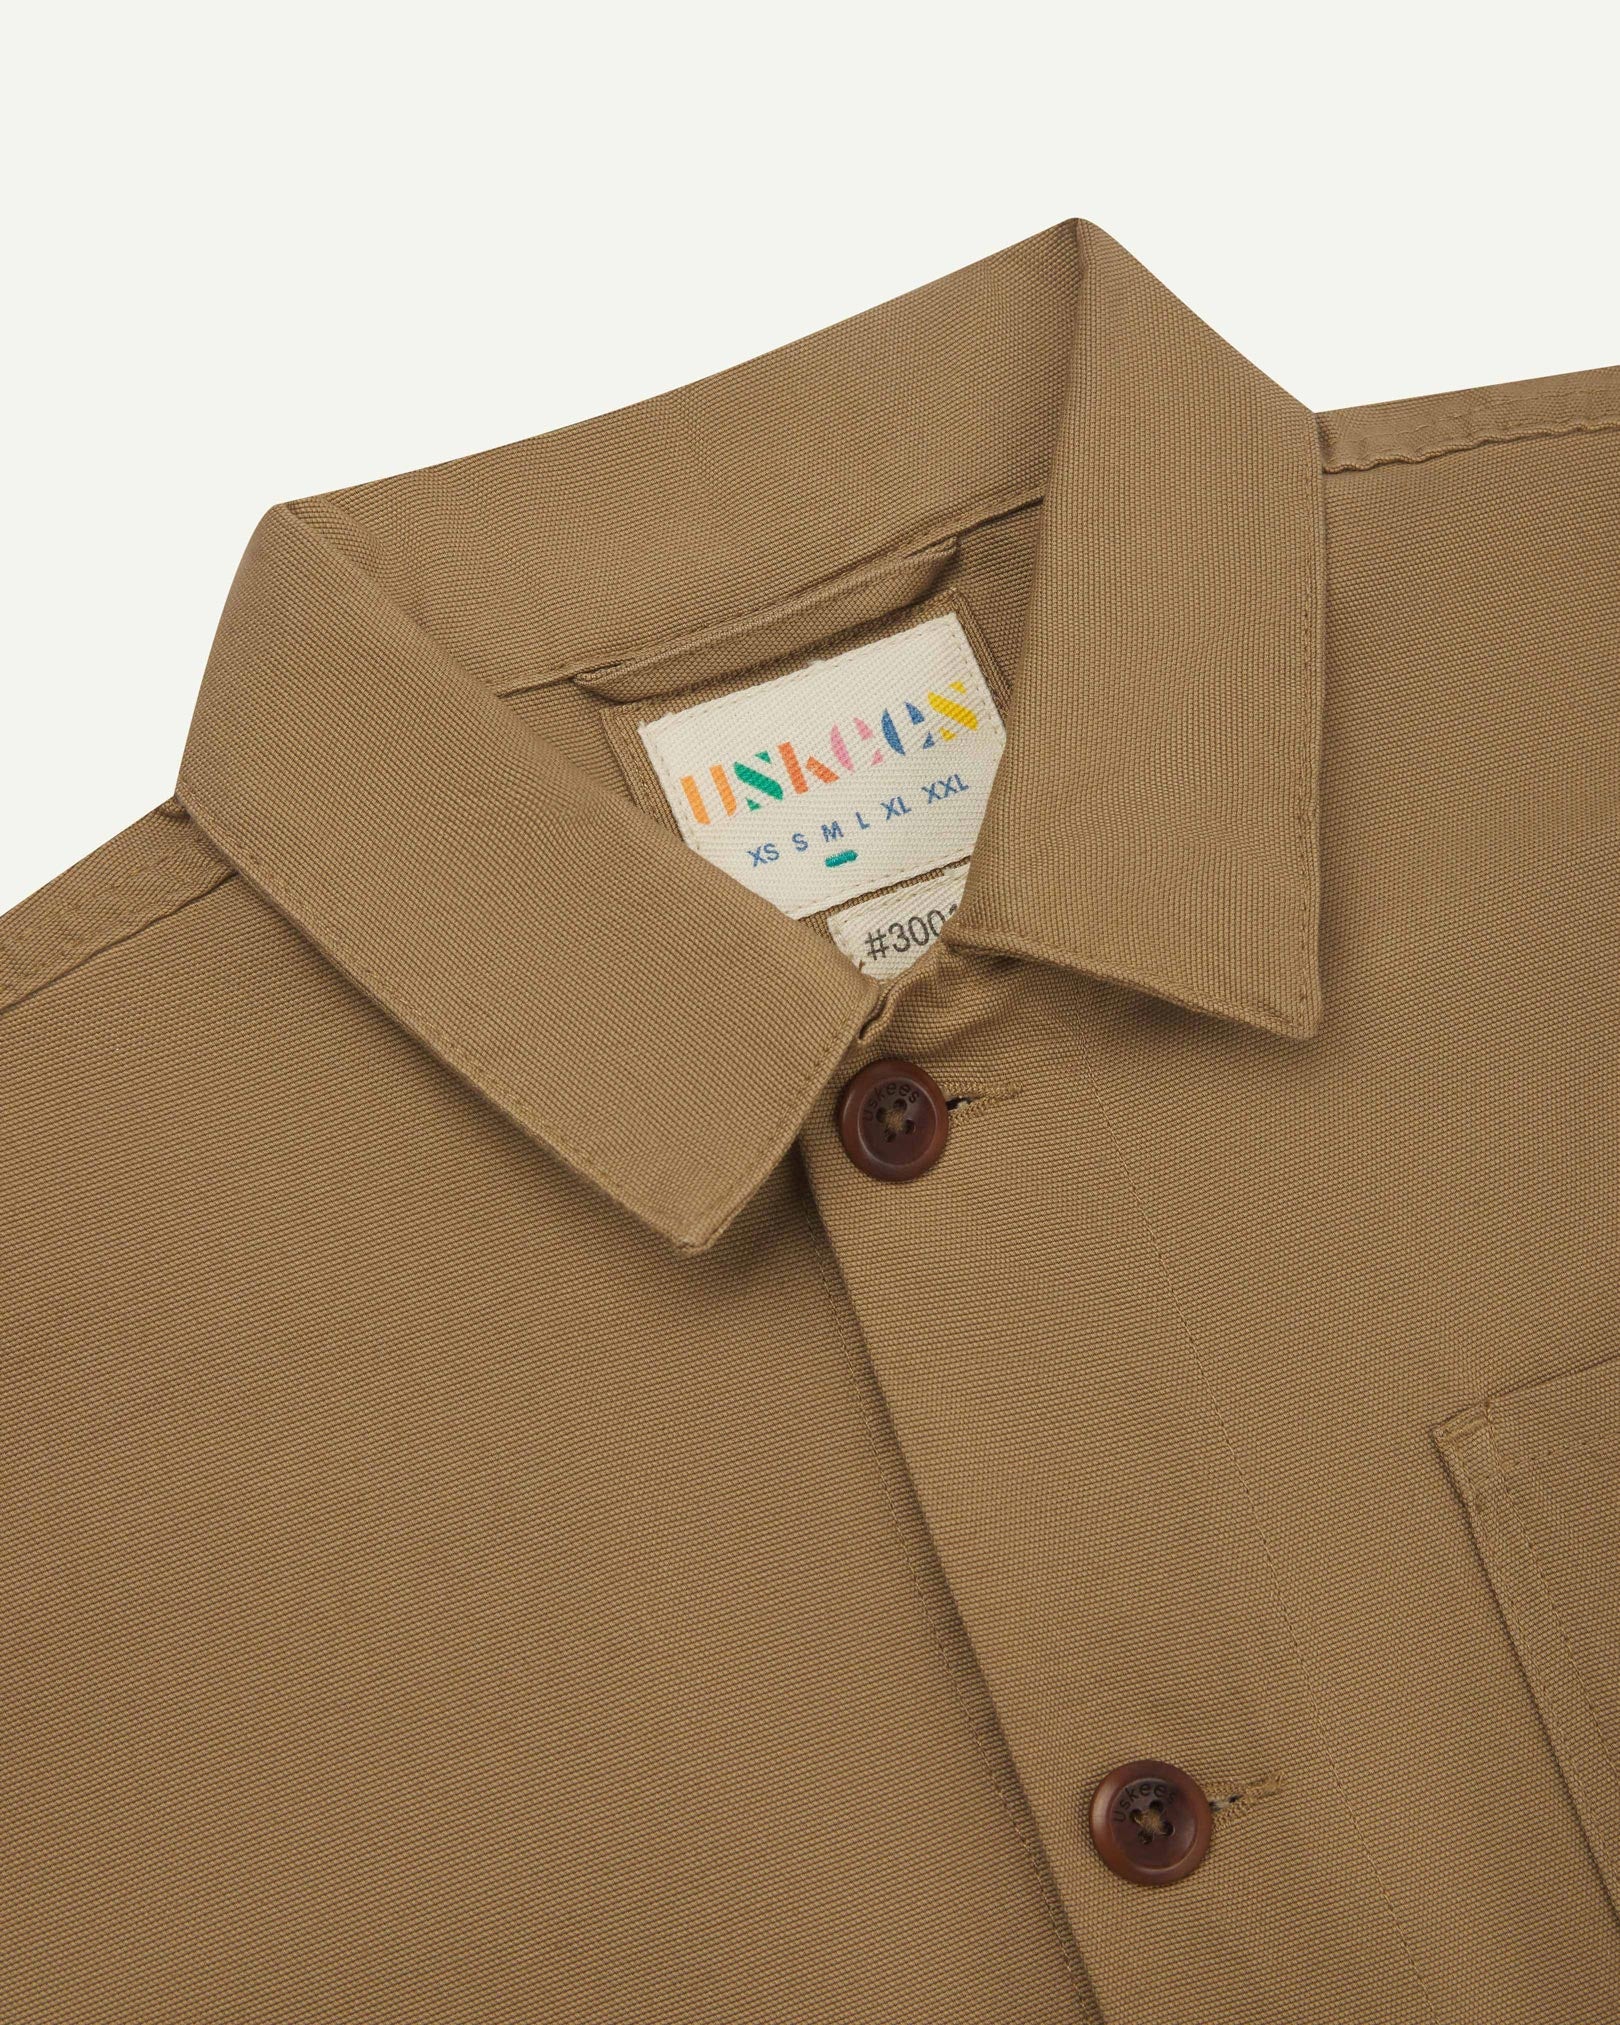 Close-up view of 3001 khaki, buttoned organic cotton overshirt from Uskees showing corozo buttons, brand label, collar and hanging hoop.